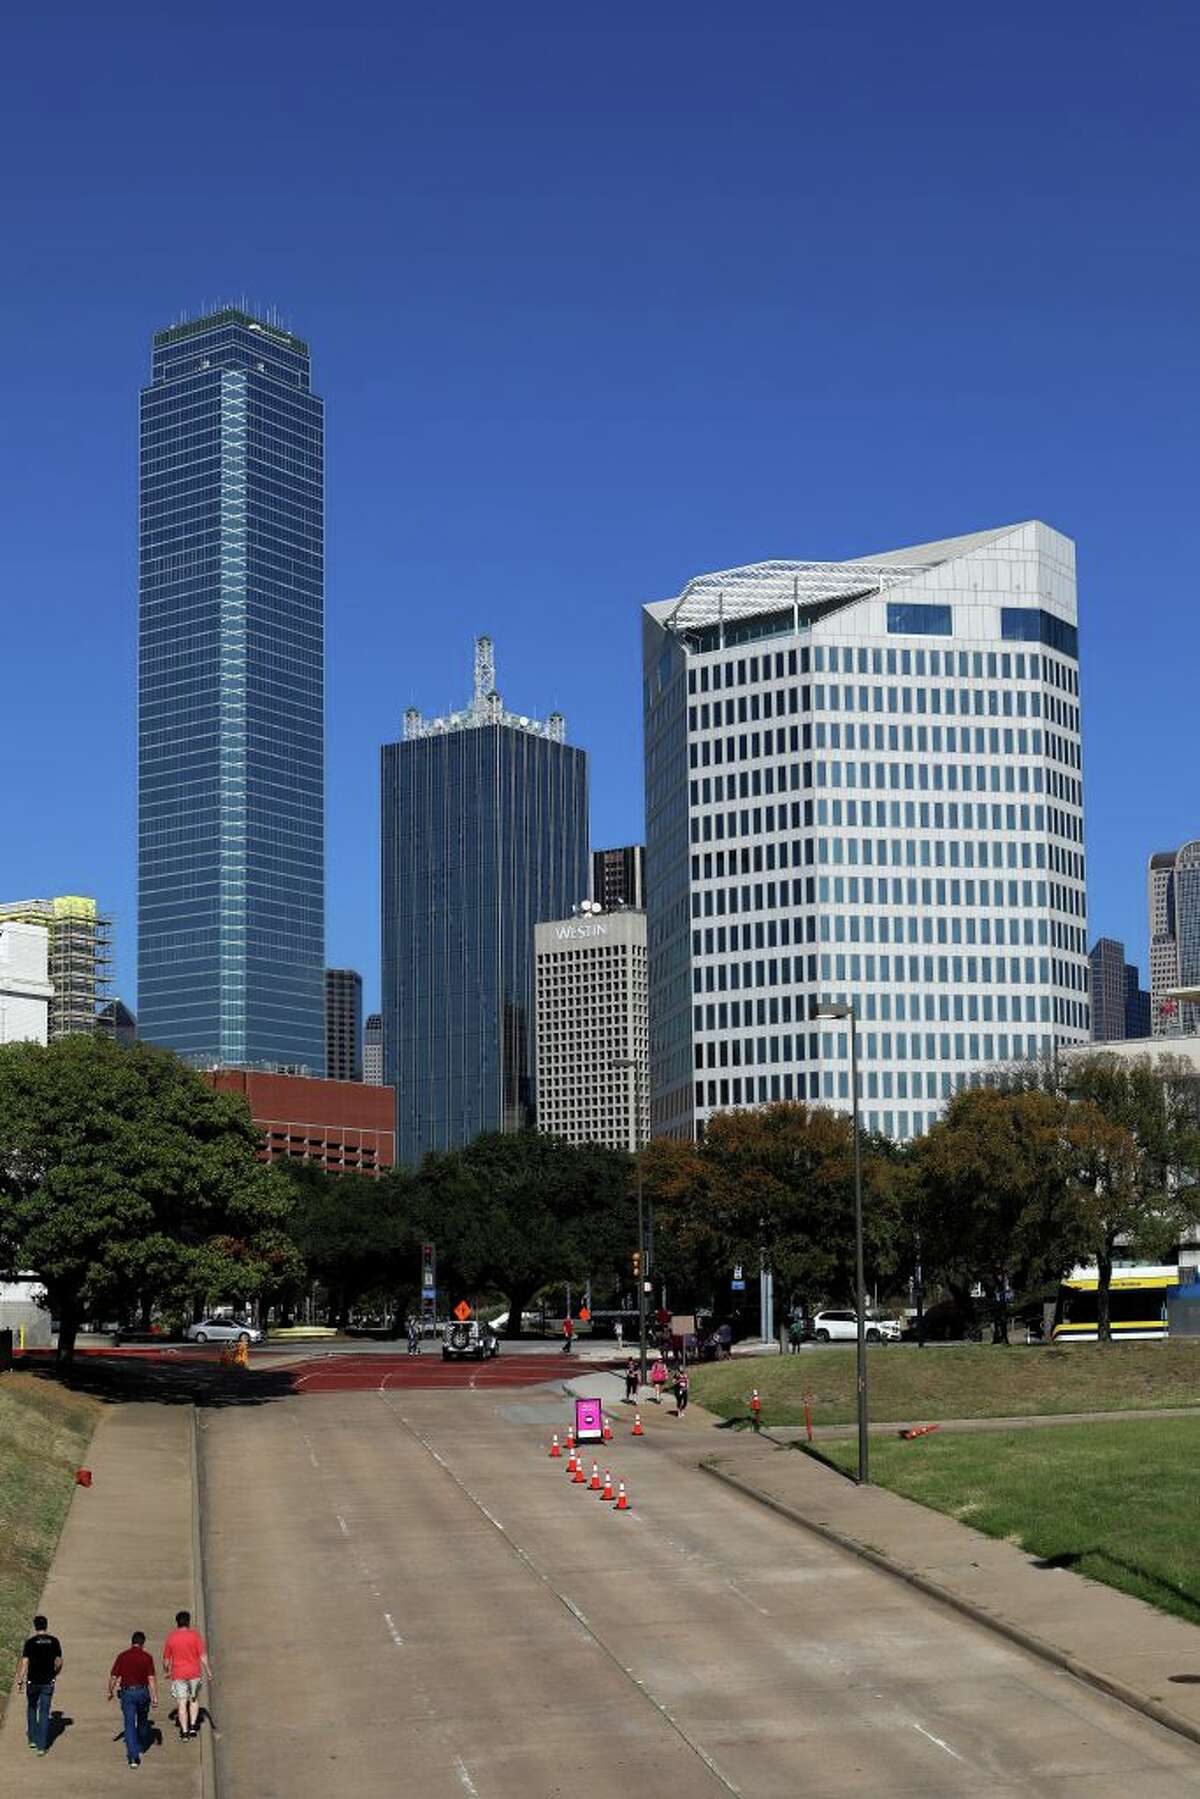 GrayStreet Partners have purchased the Renaissance Tower in downtown Dallas, seen in the center, with plans to revitalize.